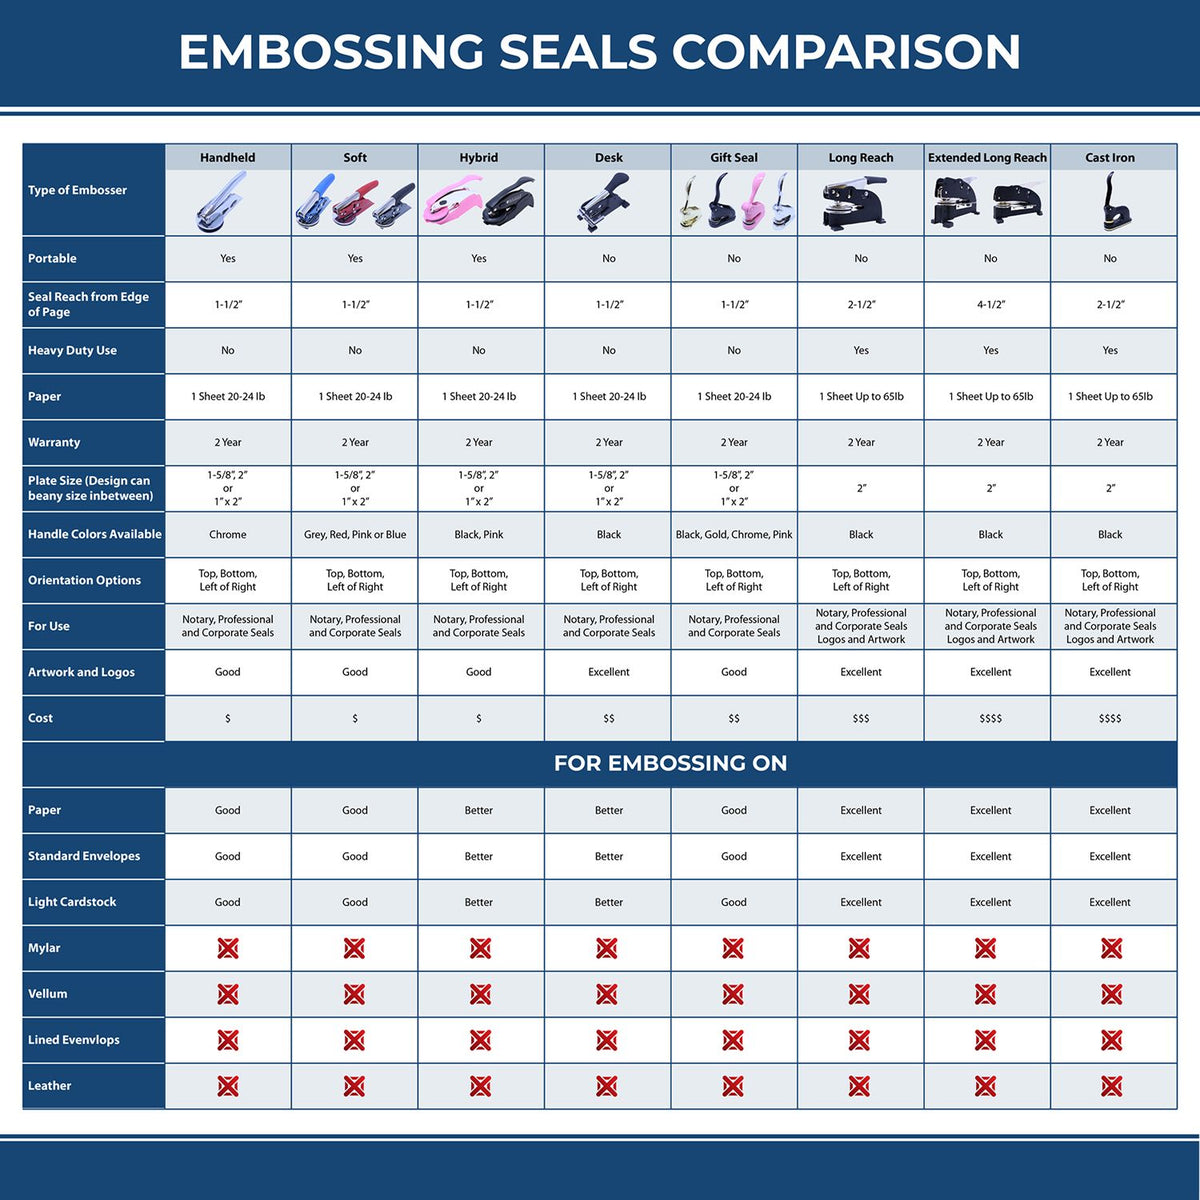 A comparison chart for the different types of mount models available for the Handheld West Virginia Professional Geologist Embosser